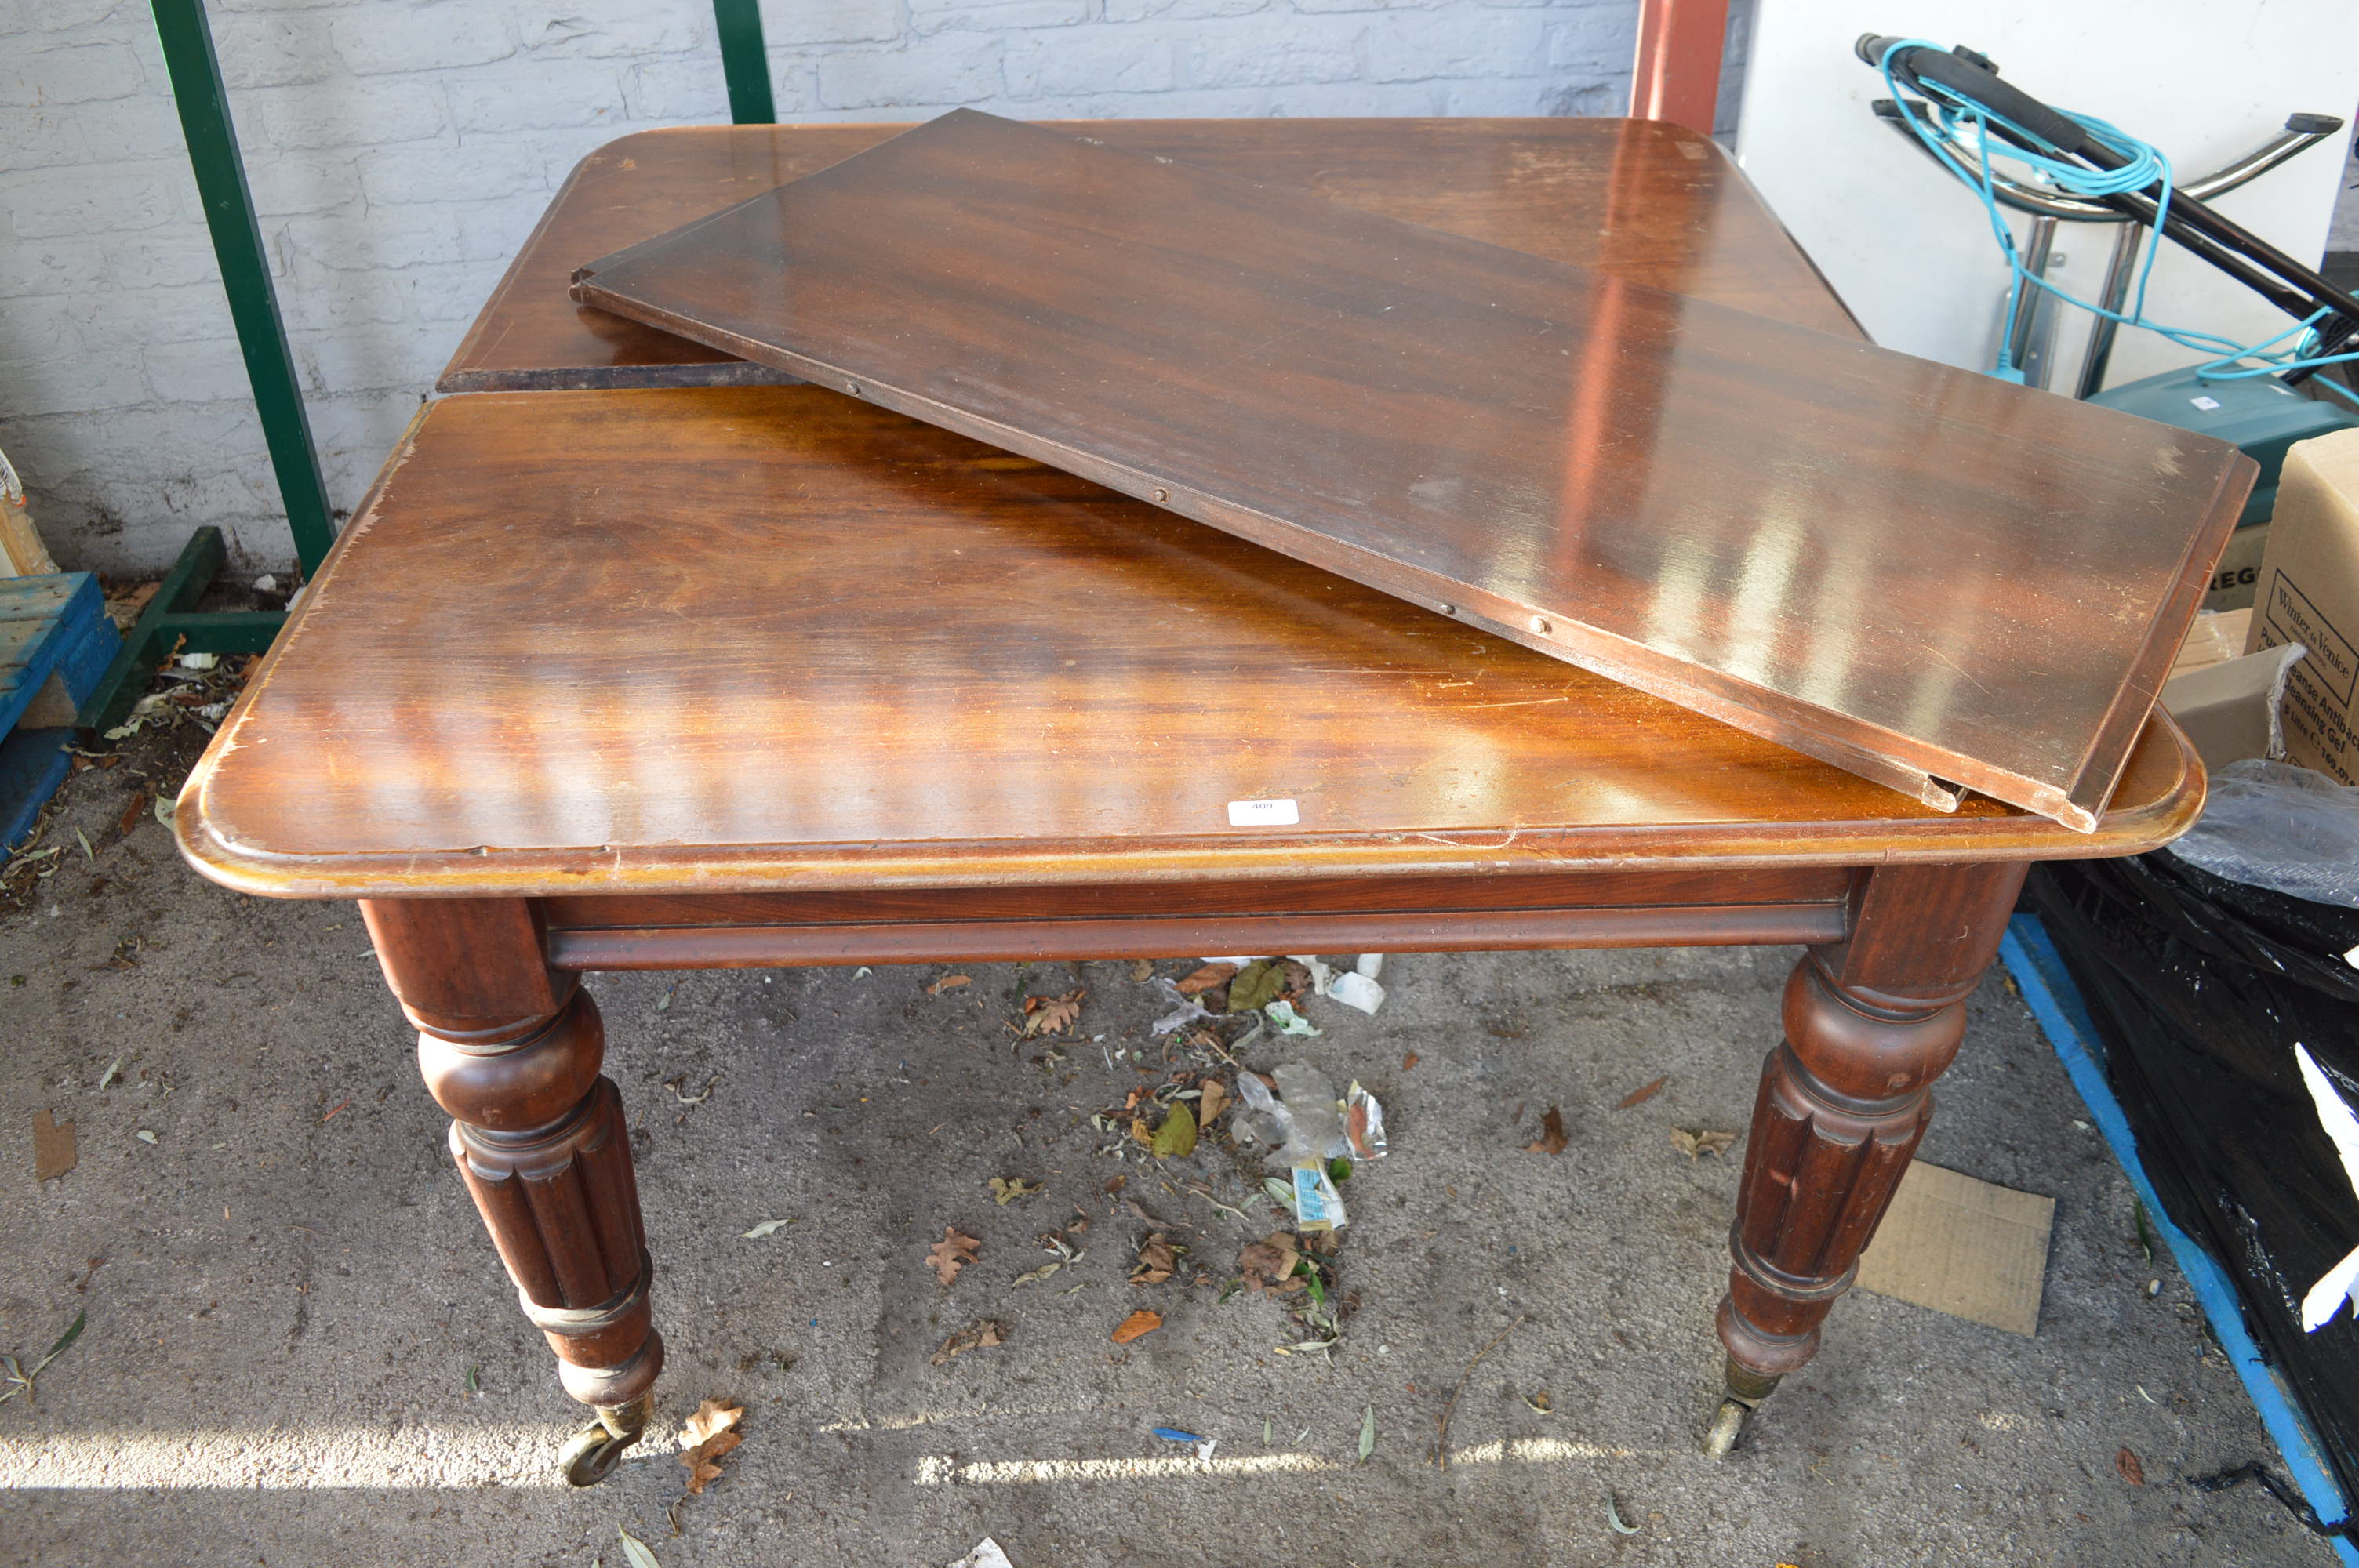 Distressed Victorian Mahogany Extending Dining Table for Restoration